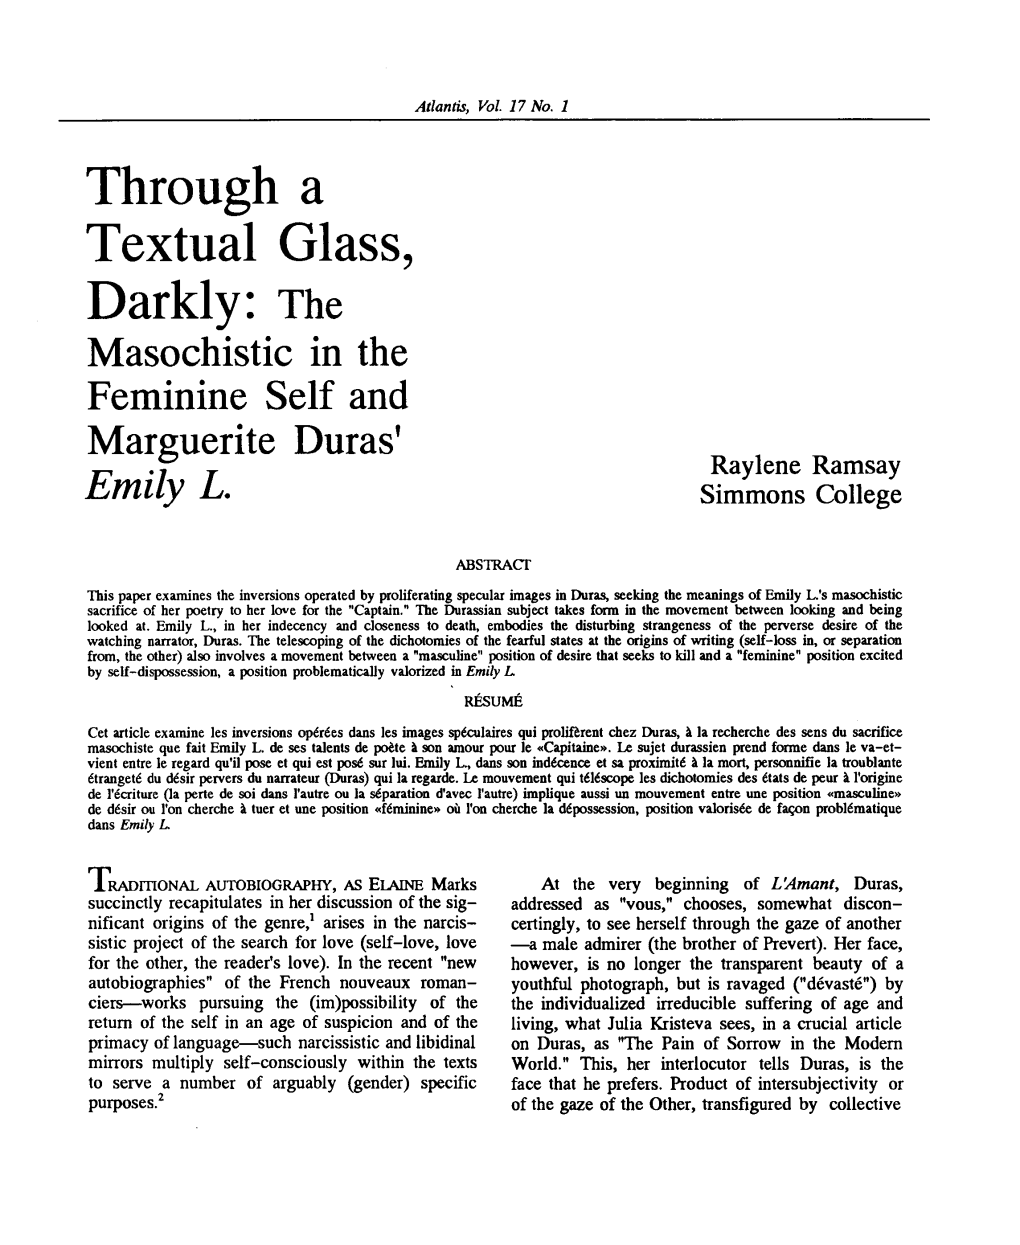 Through a Textual Glass, Darkly: the Masochistic in the Feminine Self and Marguerite Duras' Raylene Ramsay Simmons College